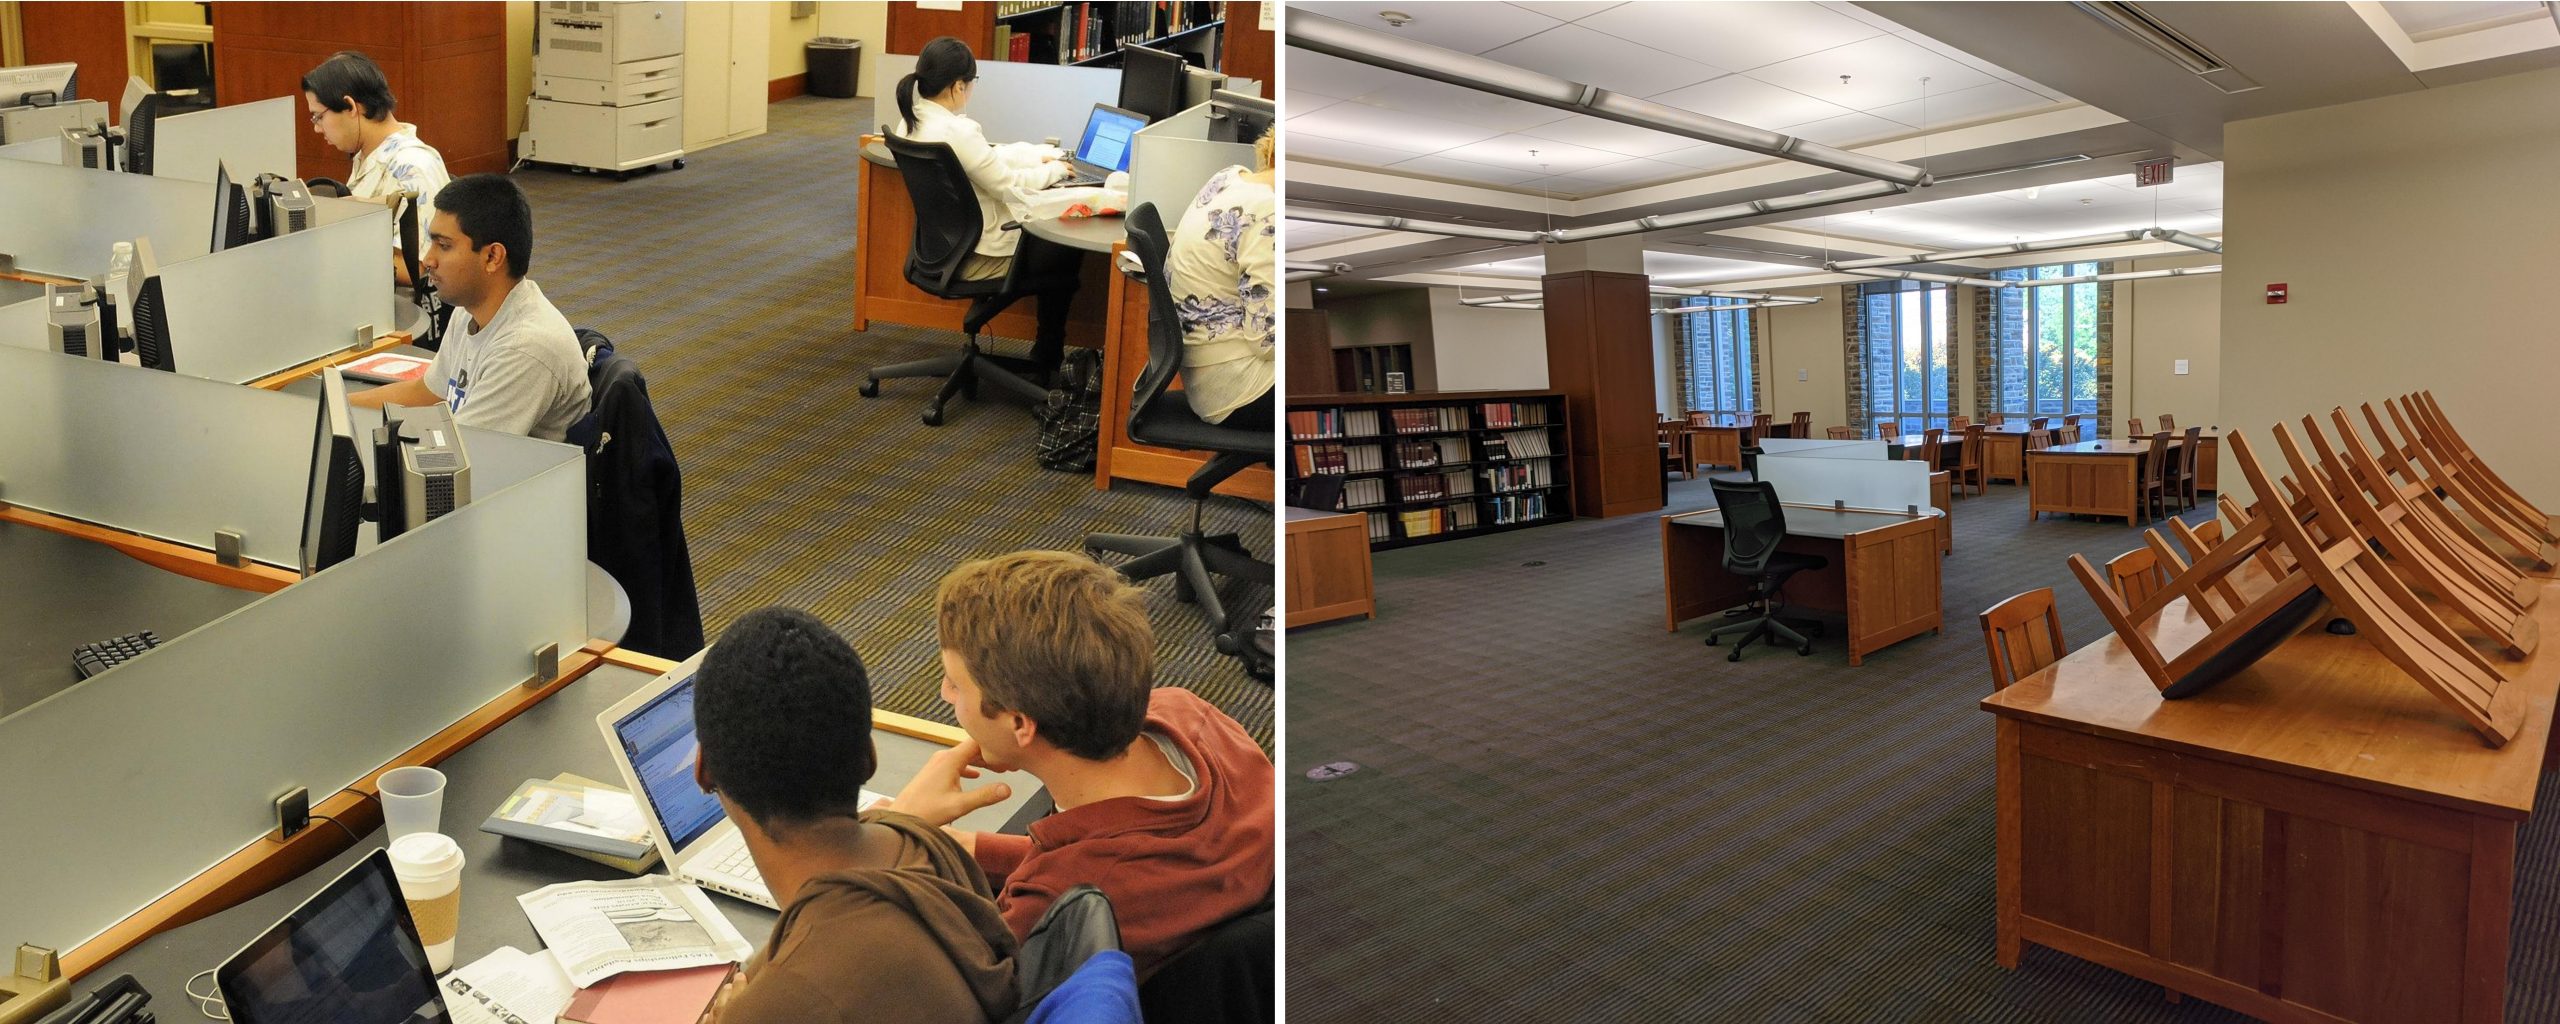 Yet more study areas, Perkins Library, before and after